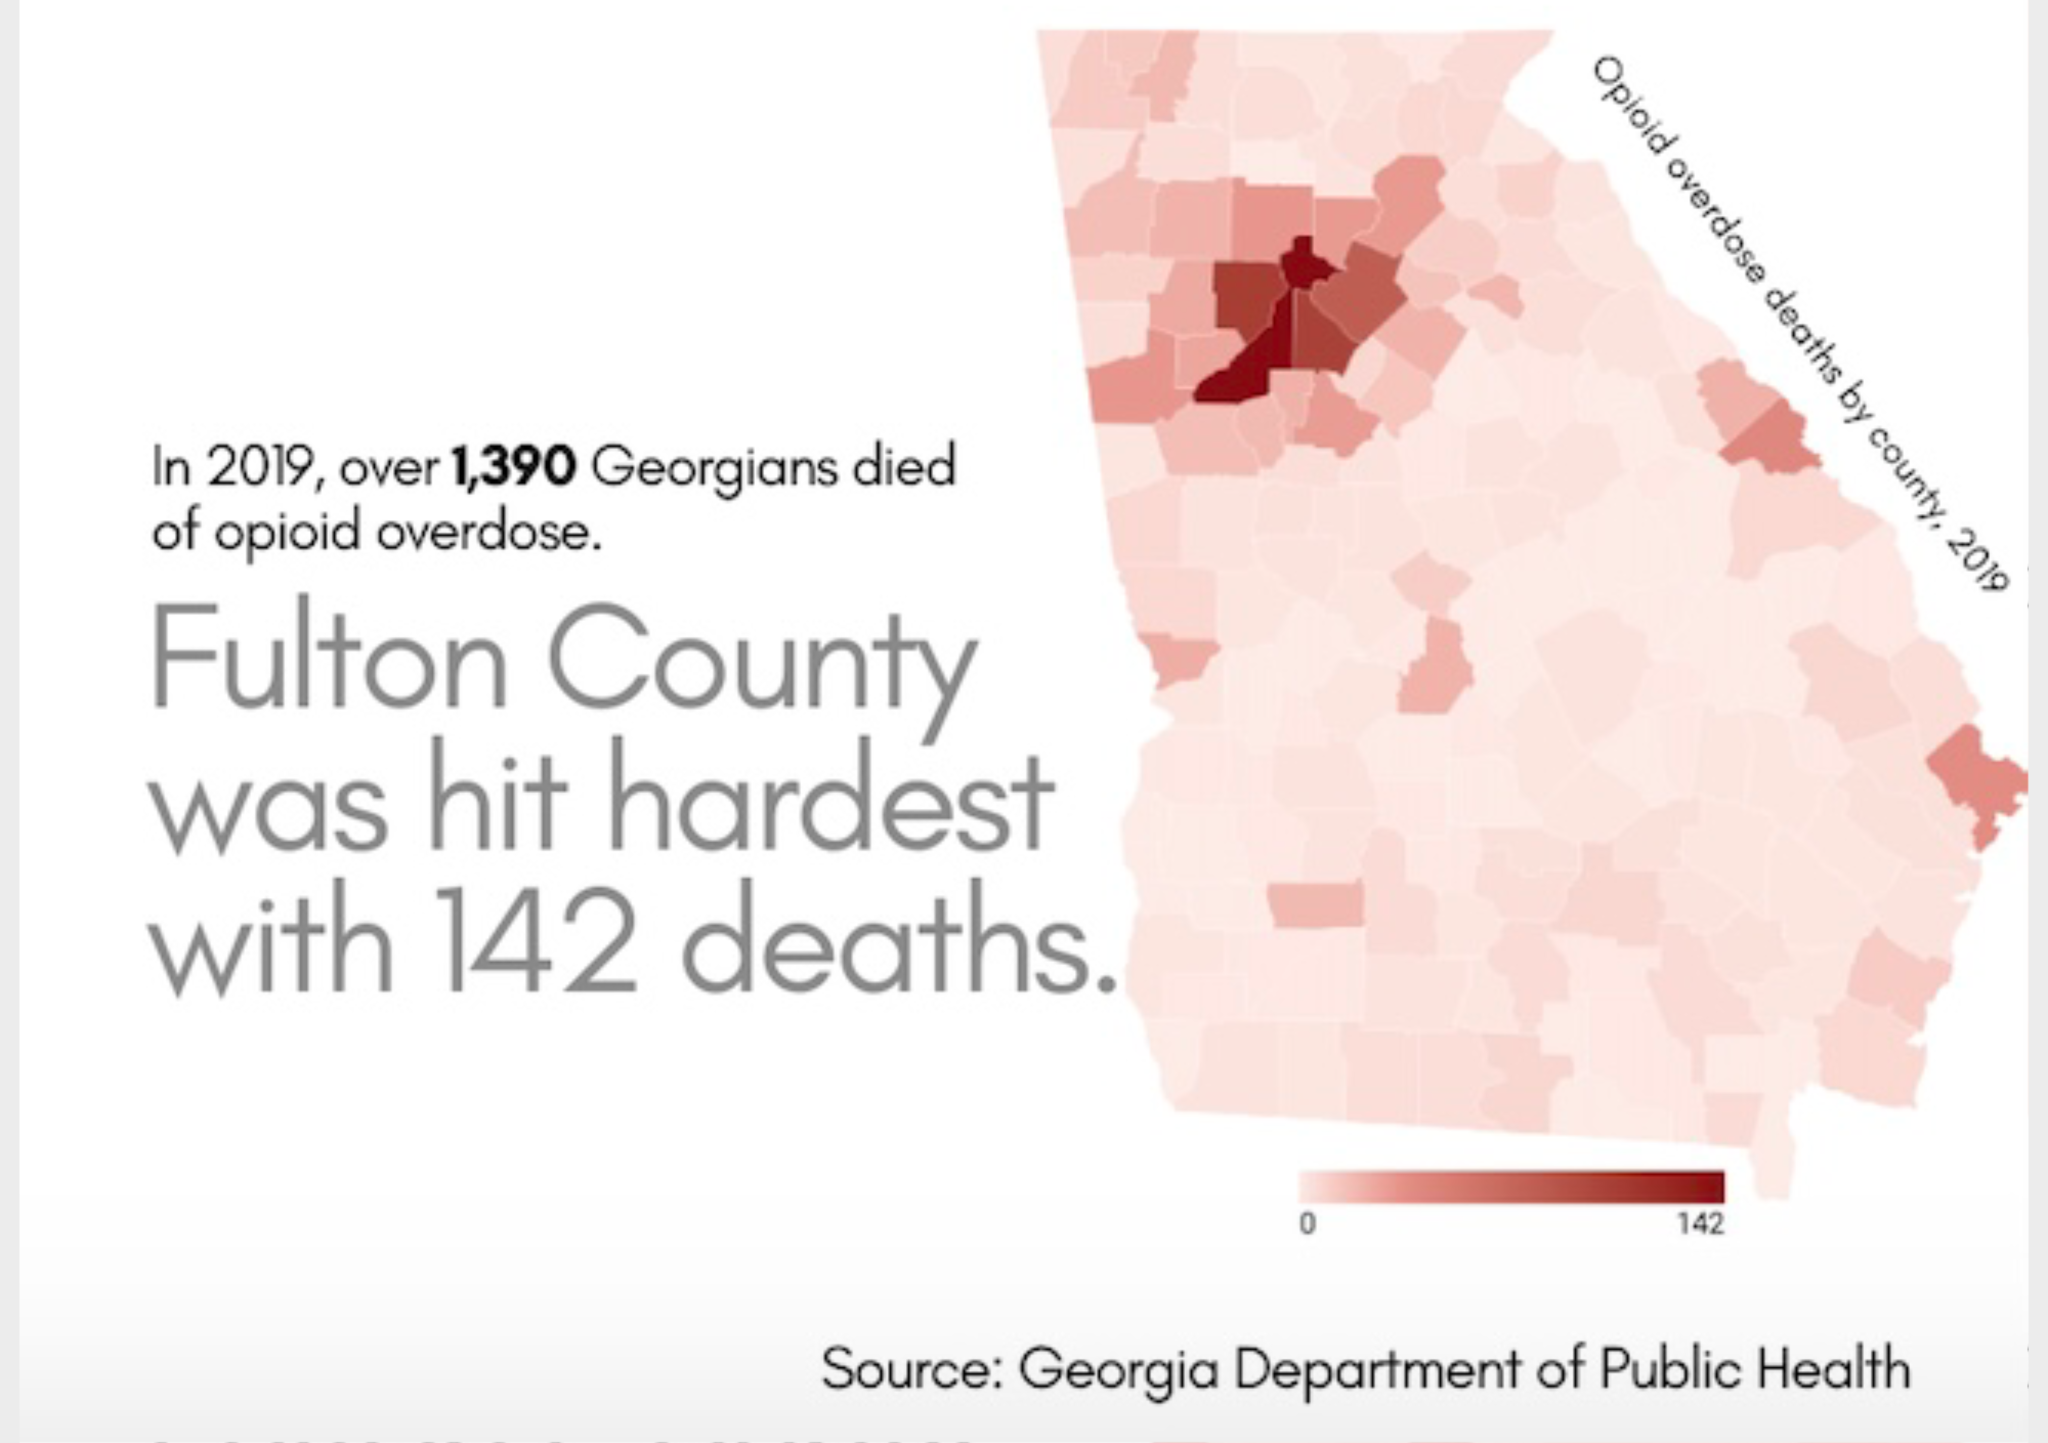 Graphic of the state of Georgia on a map with each county in a different shade of red to represent number of opioid overdoses and text that reads 'Fulton County was hit hardest'